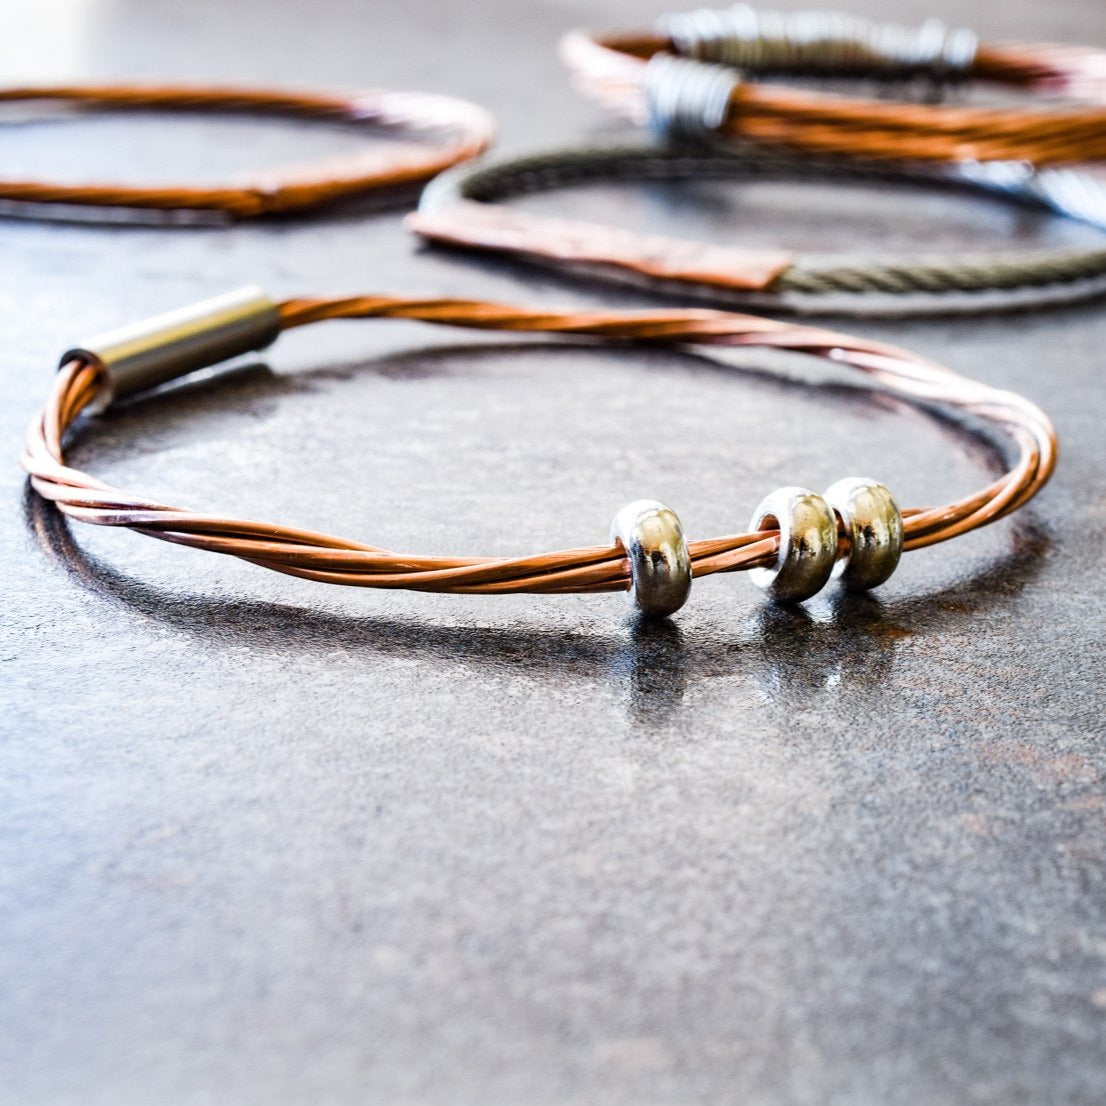 Handmade Copper Link Bracelet with Wire Wrapped Bead Charms